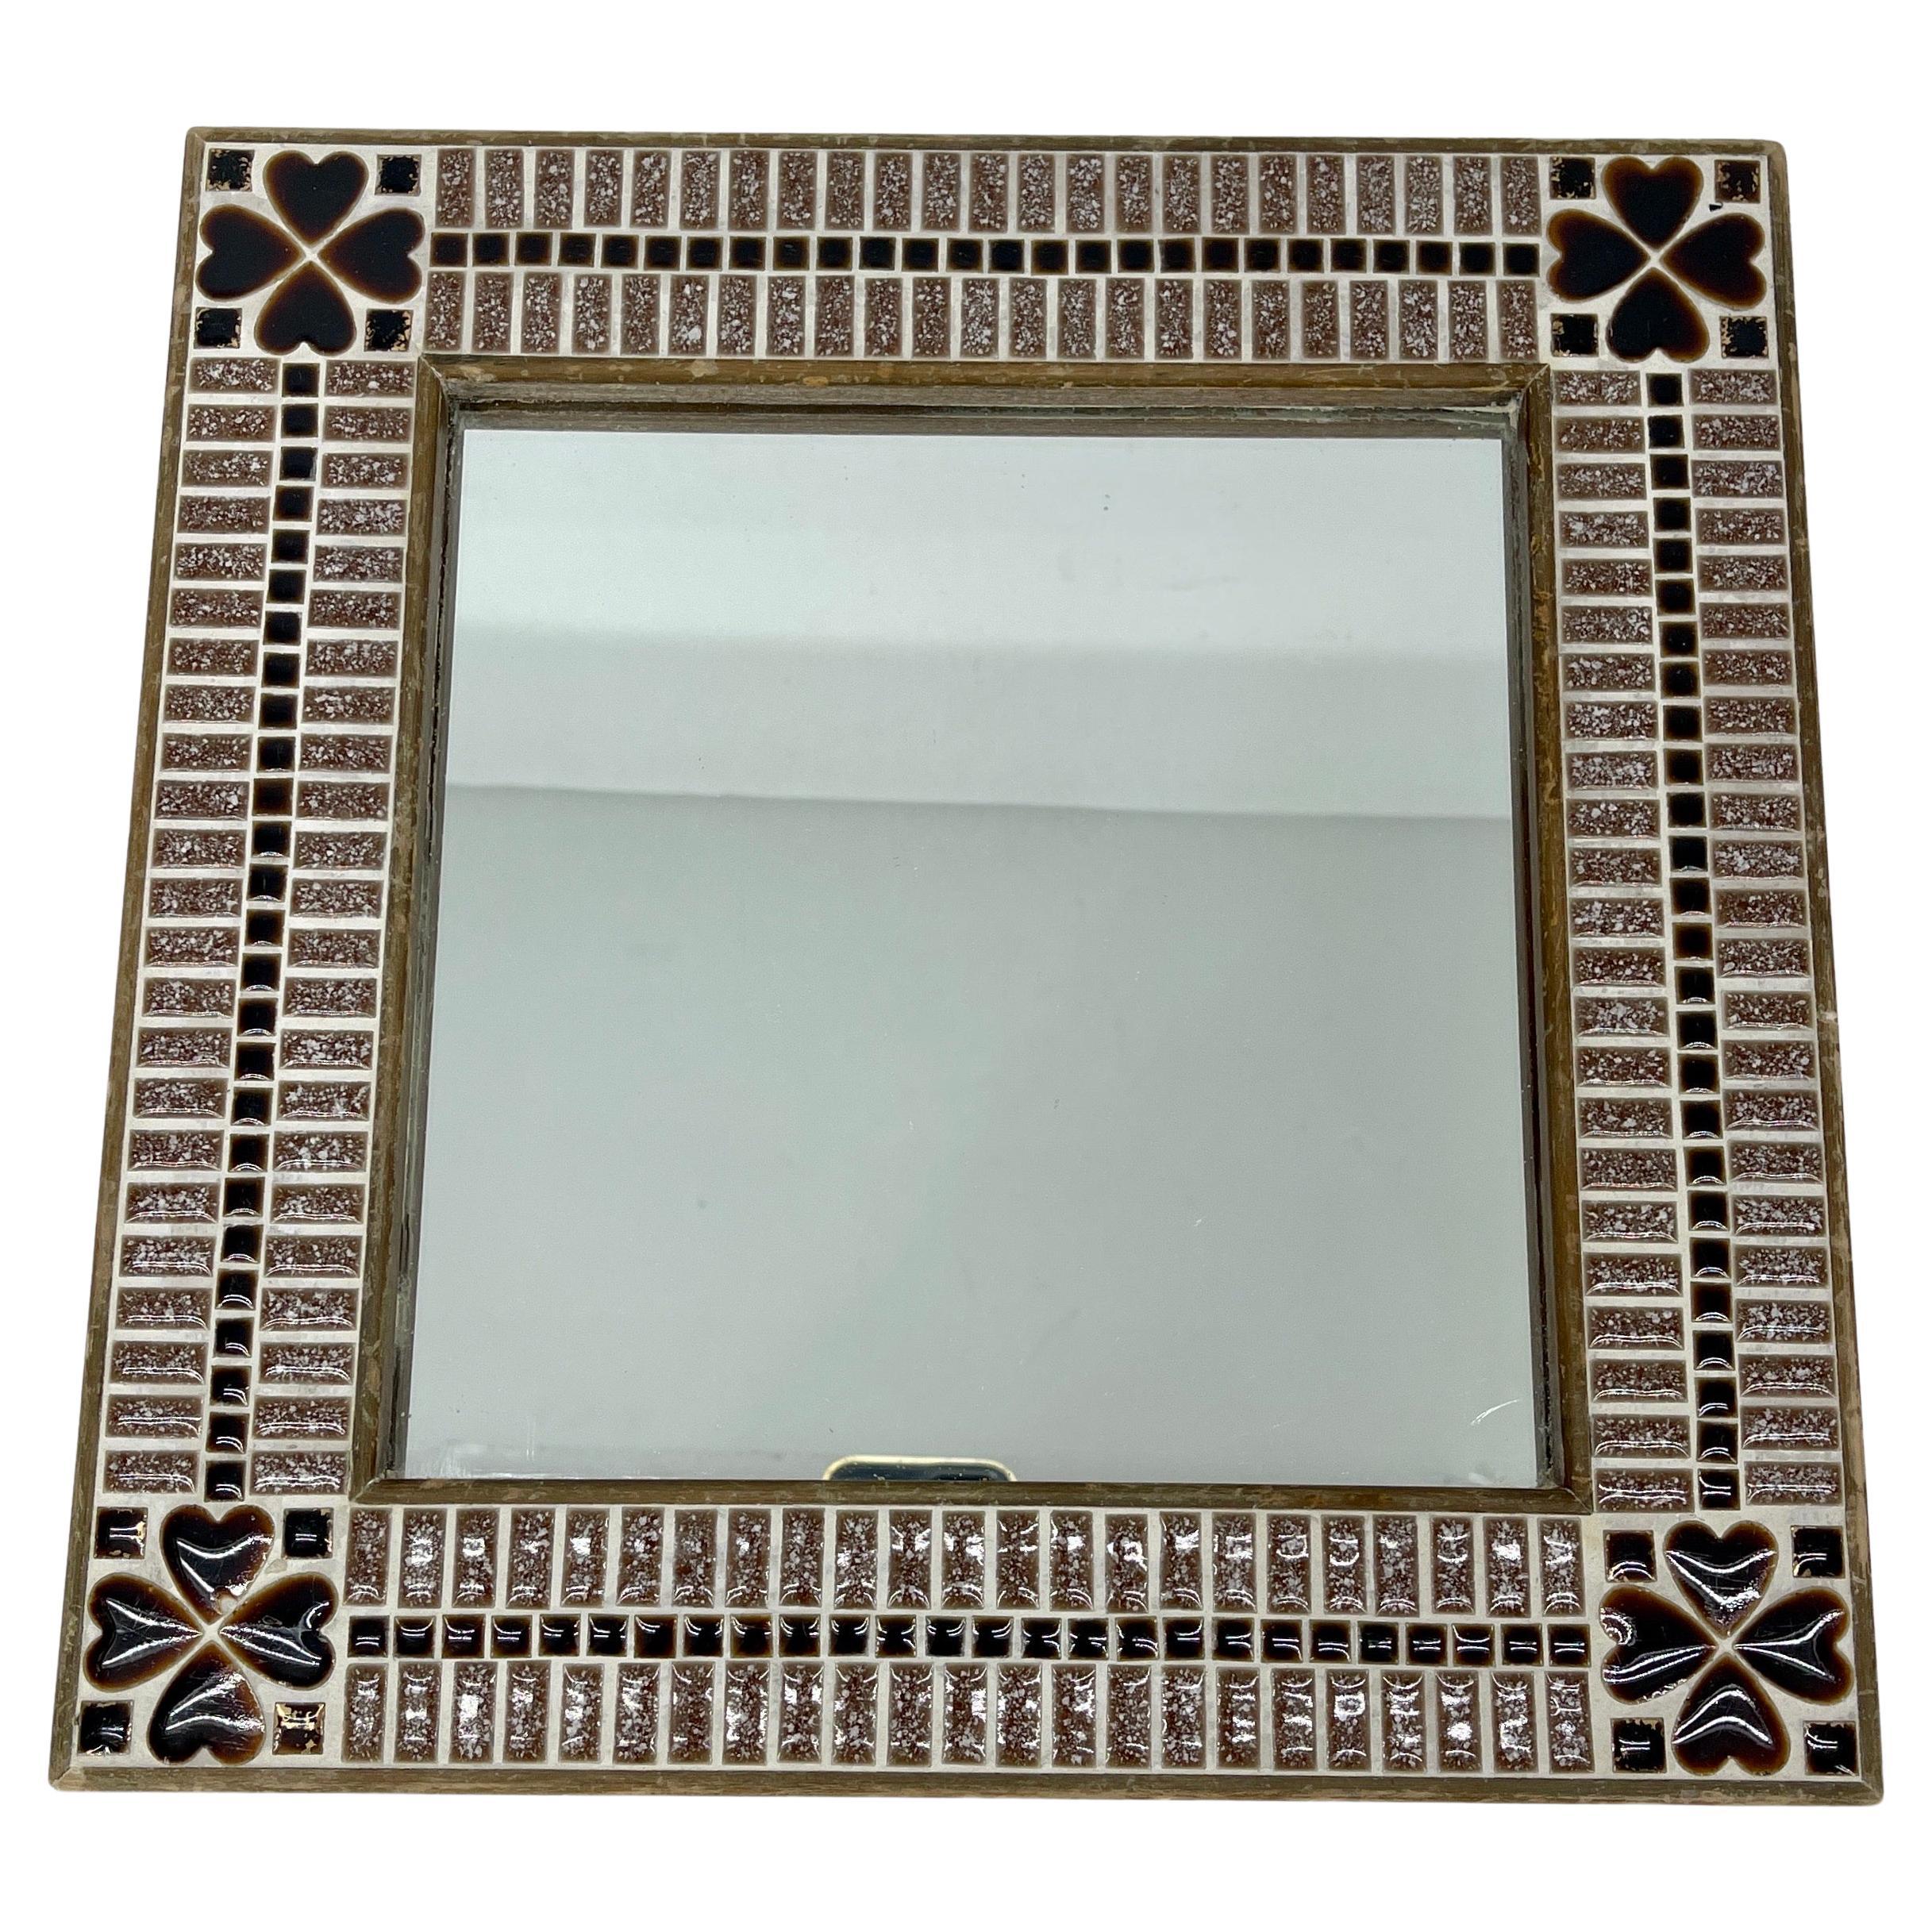 Hand-Crafted Small Square Tile Mirror with Heart Decorations For Sale